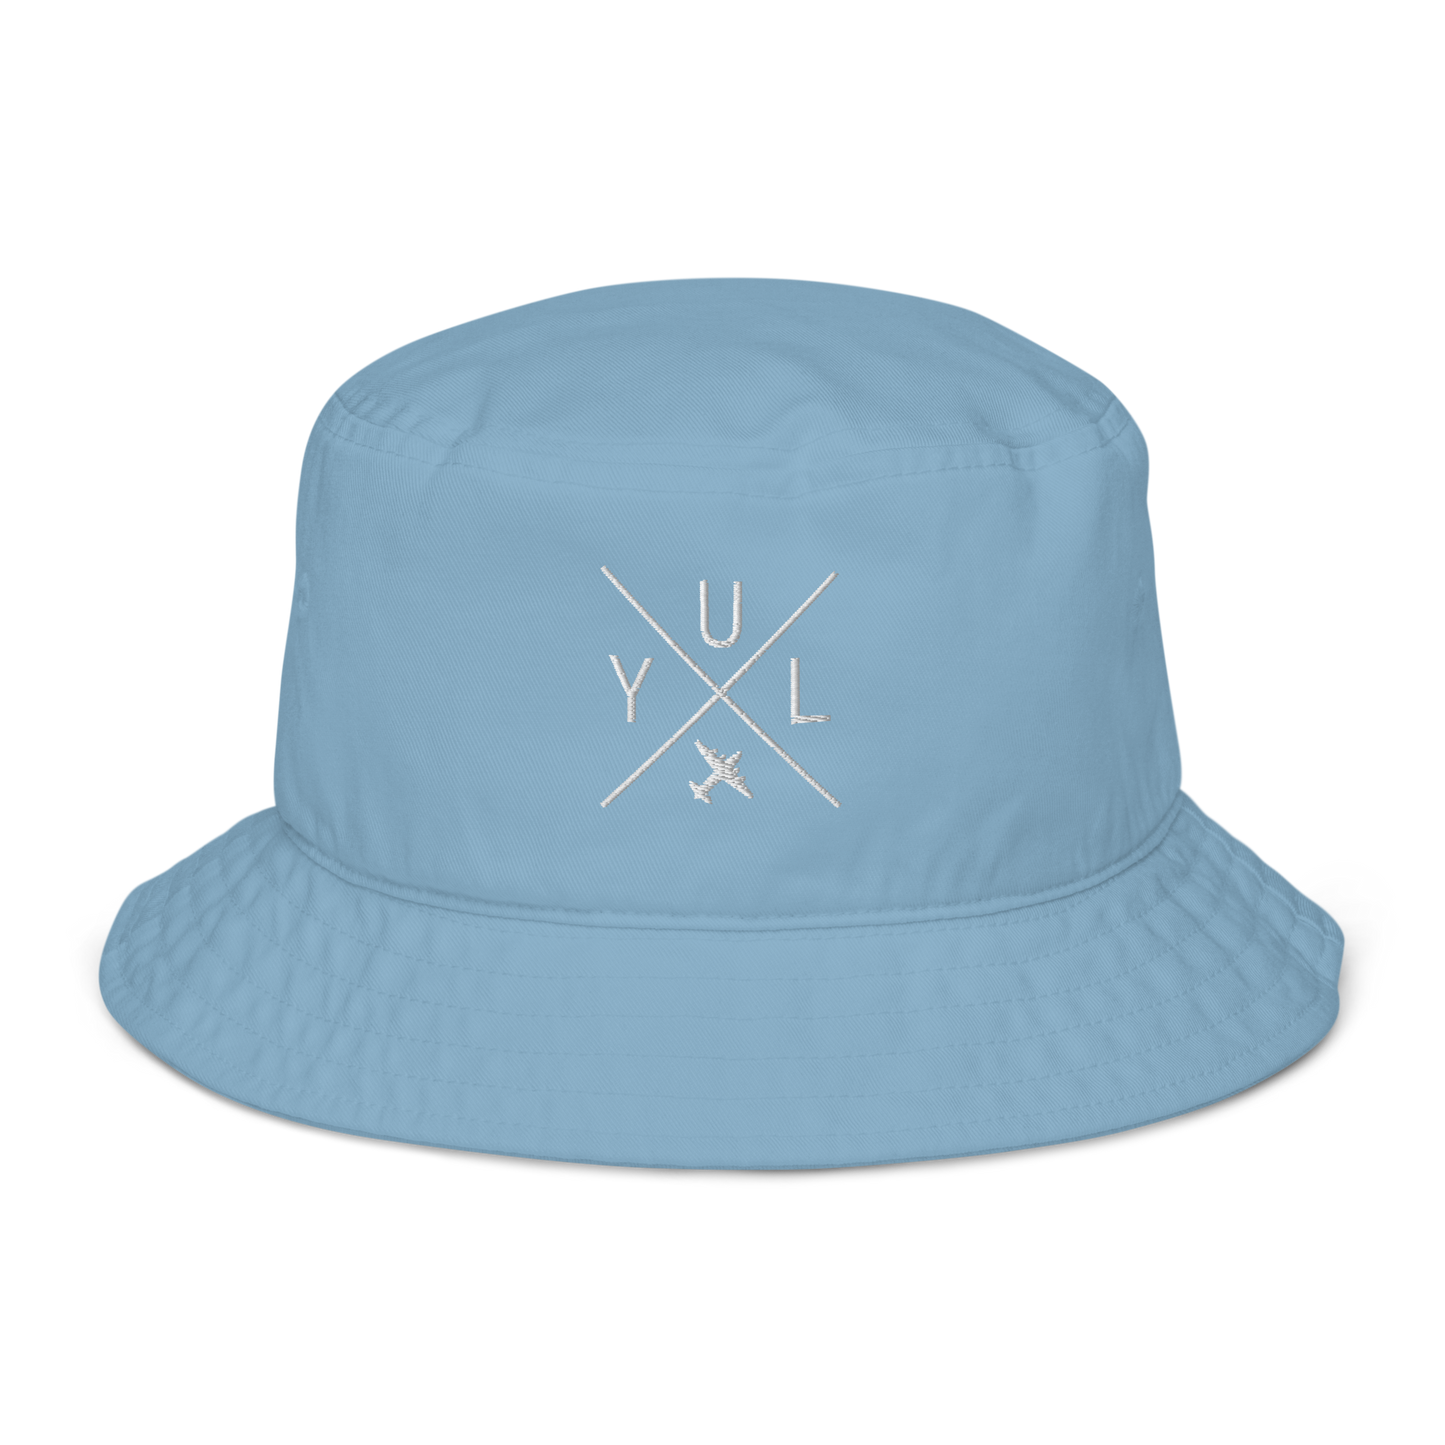 YHM Designs - YUL Montreal Organic Cotton Bucket Hat - Crossed-X Design with Airport Code and Vintage Propliner - White Embroidery - Image 07